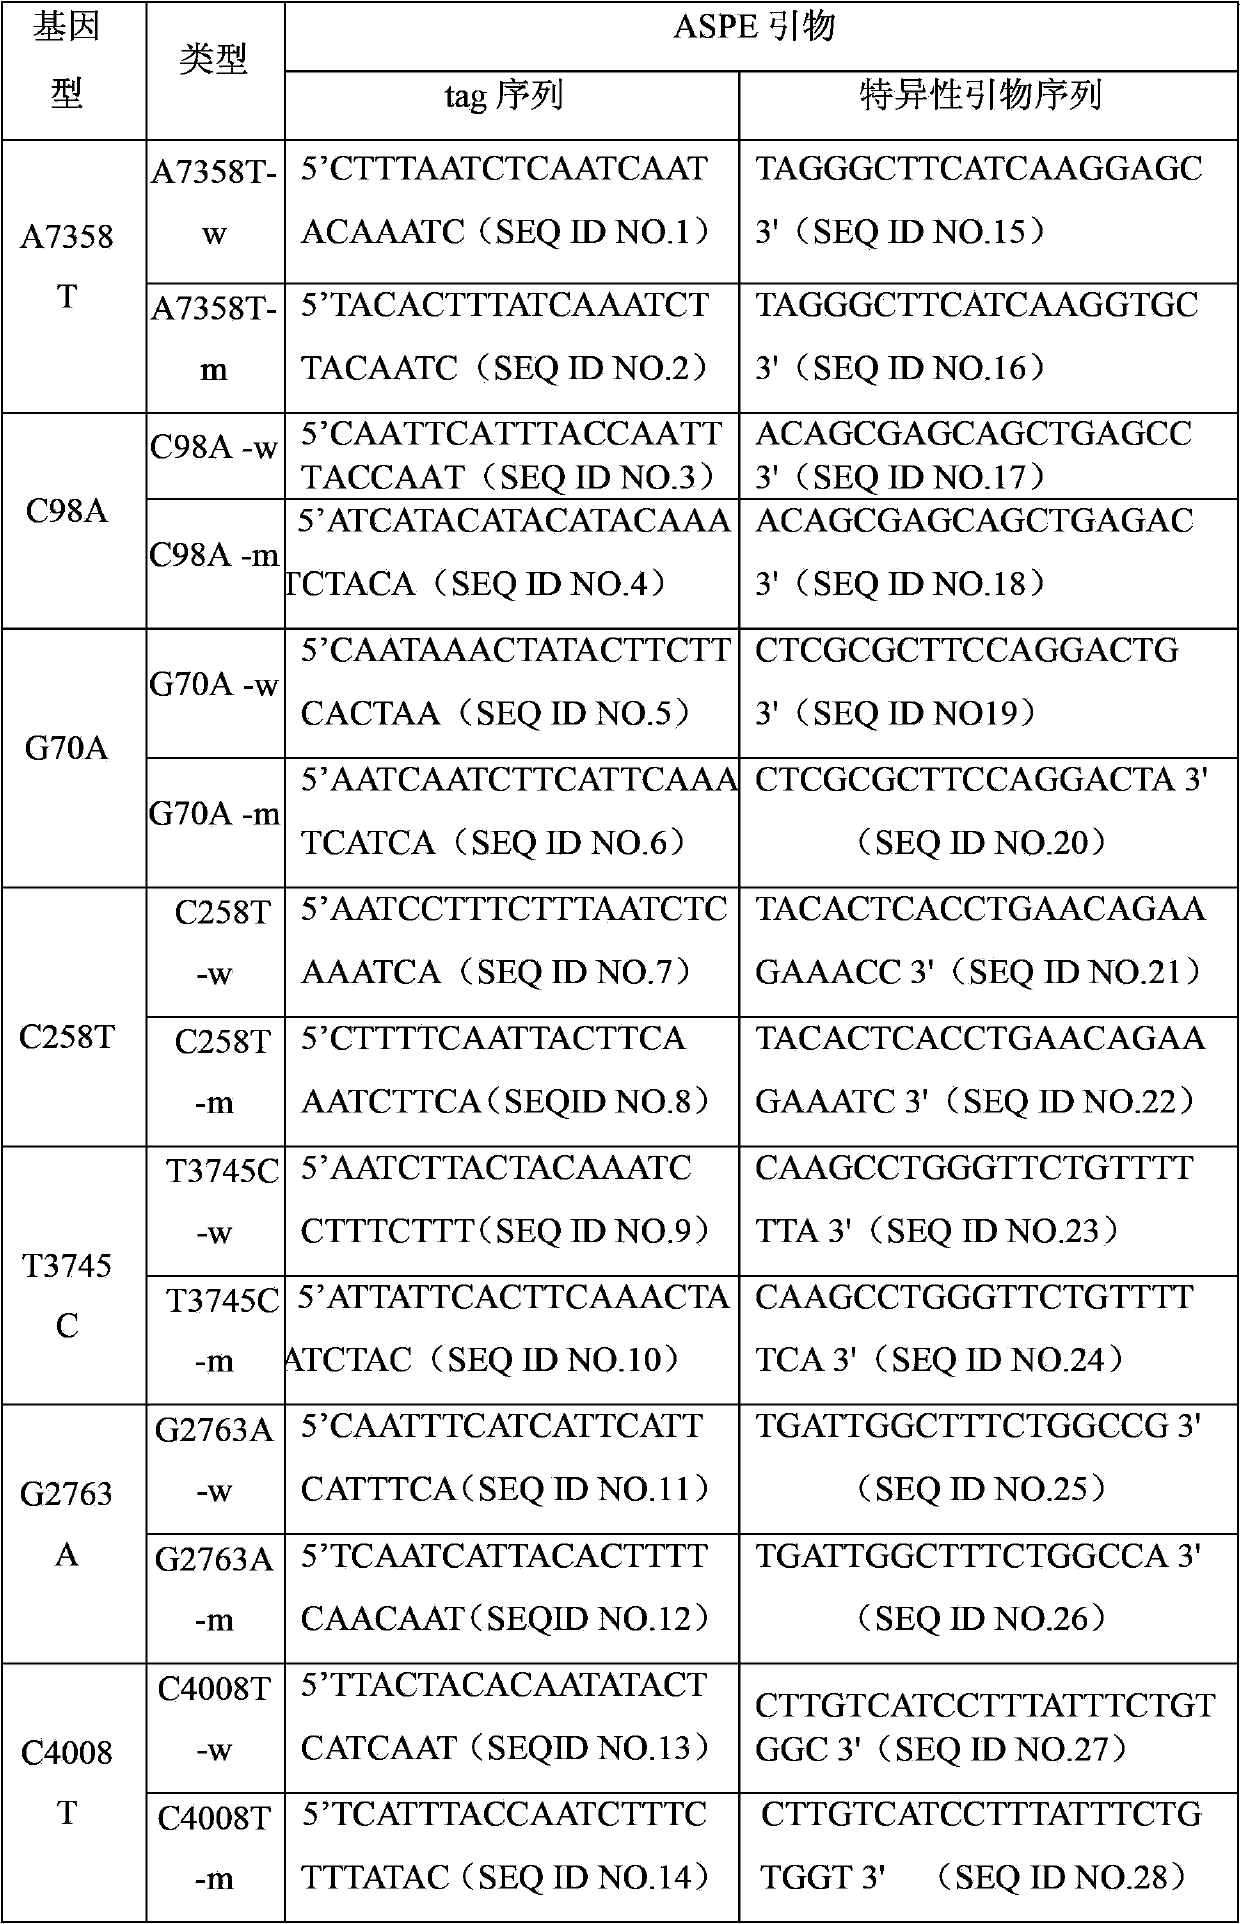 CDKN1A gene mutation detection specific primers and liquid chip